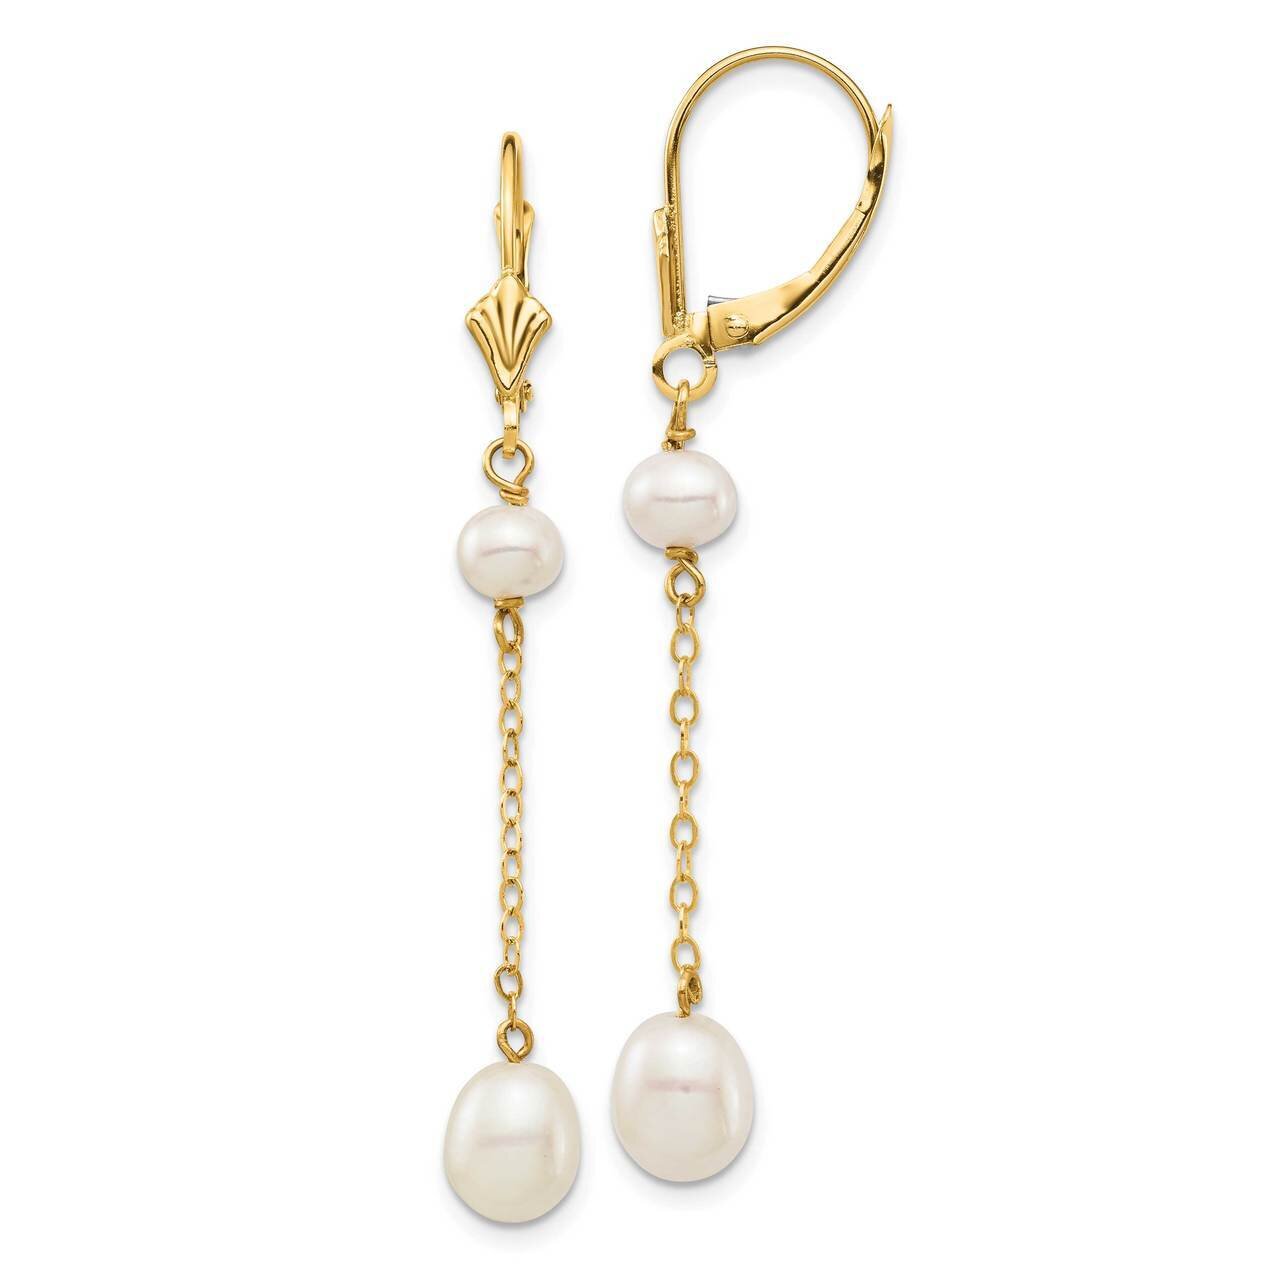 5-7mm White Rice Freshwater Cultured Pearl Leverback Earrings 14k Gold XF722E